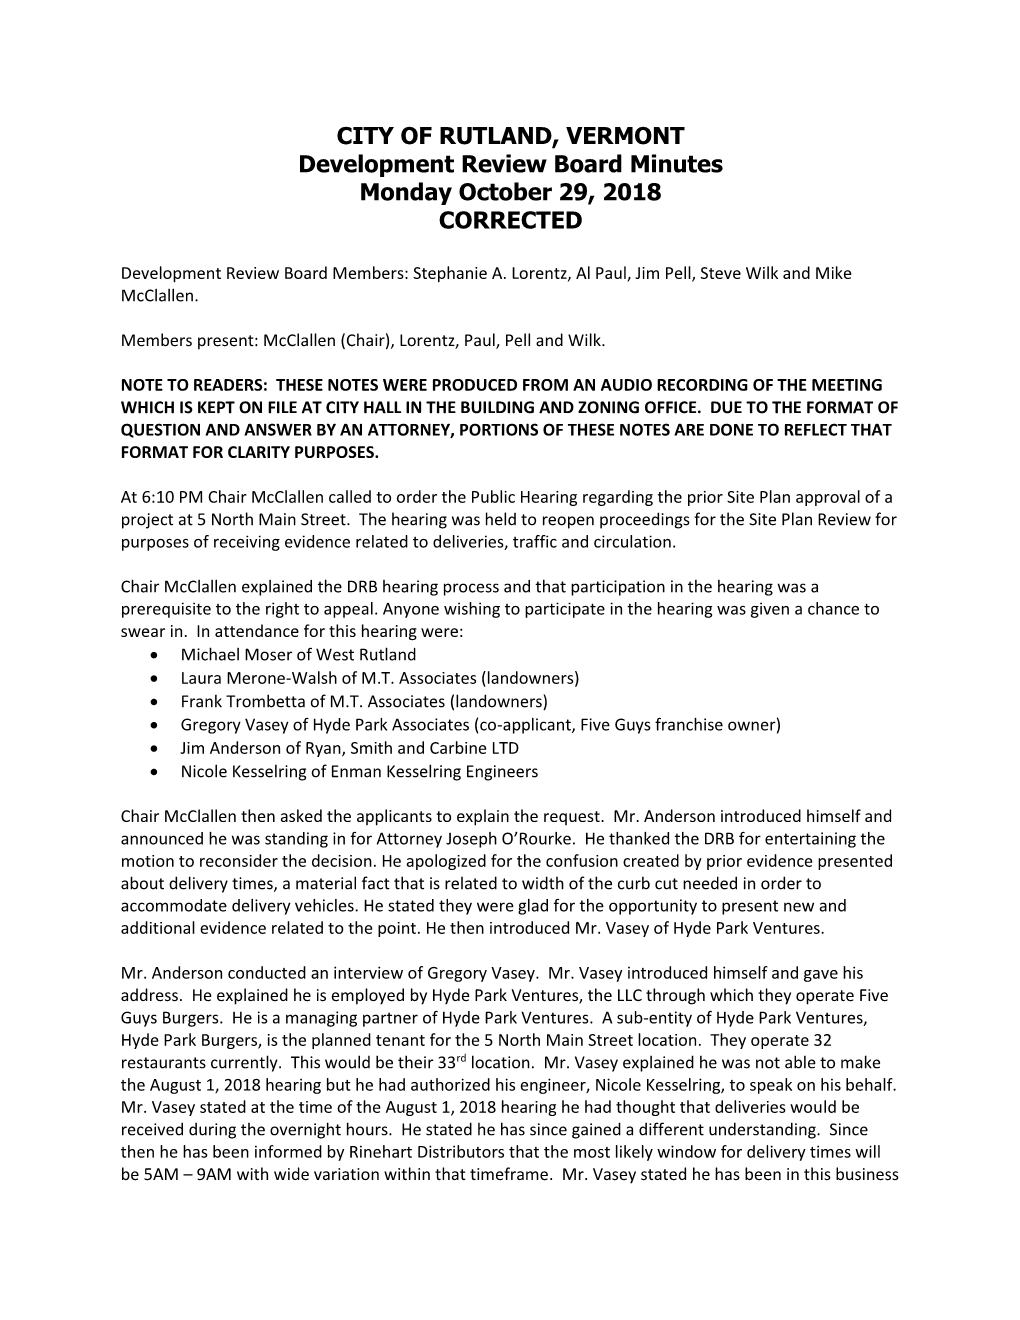 CITY of RUTLAND, VERMONT Development Review Board Minutes Monday October 29, 2018 CORRECTED